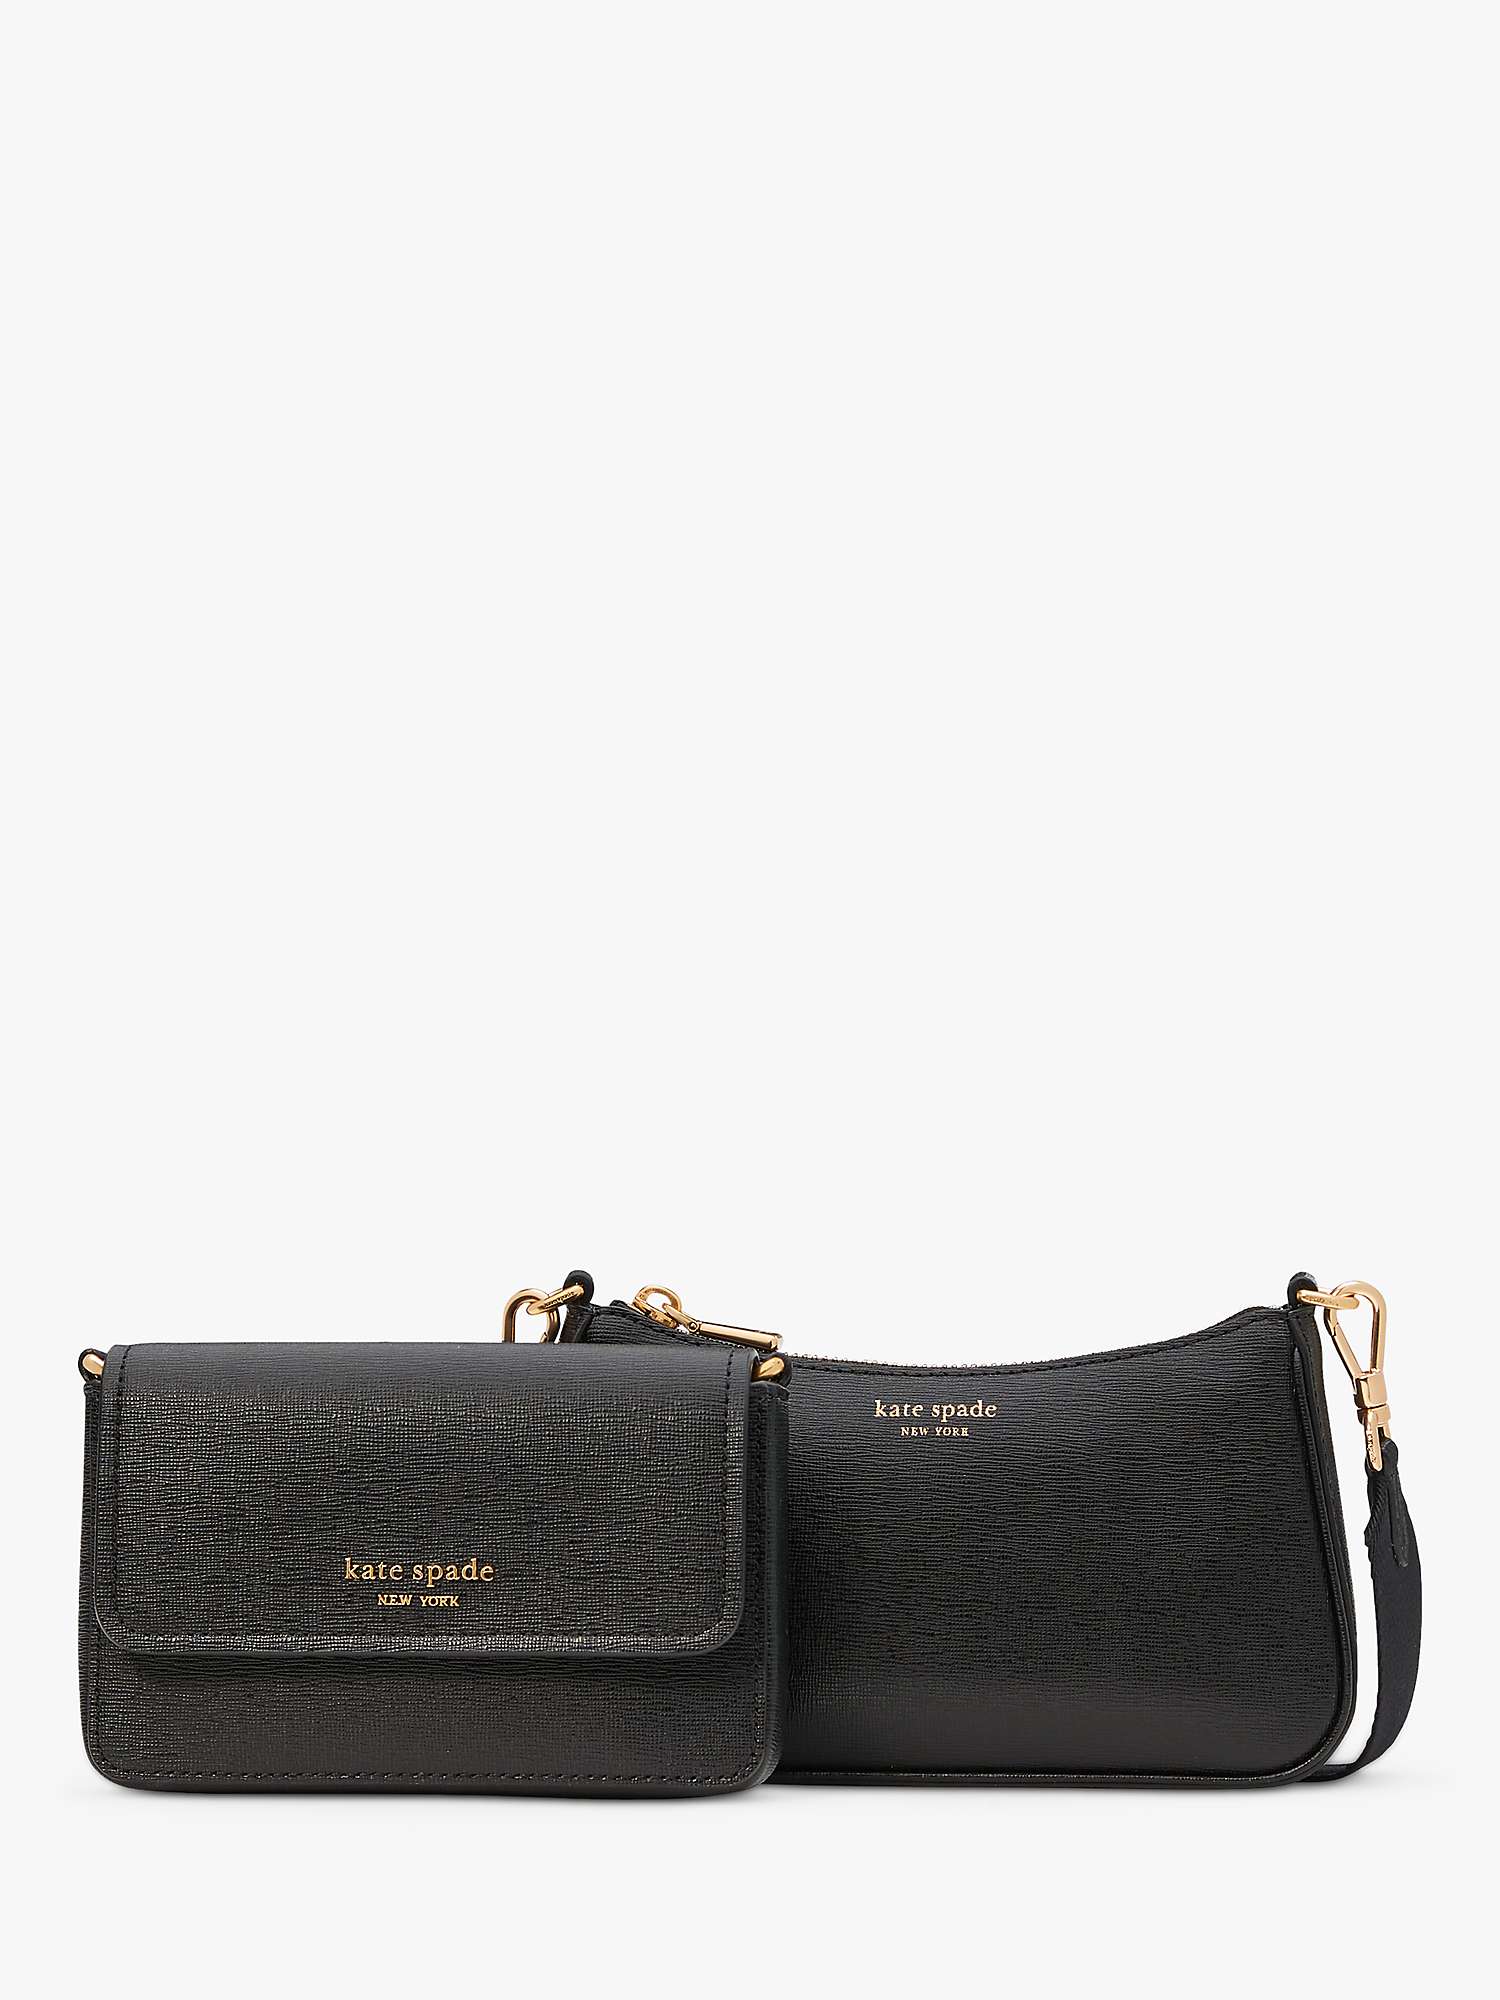 Buy kate spade new york Morgan Leather Double Up Crossbody Bag Online at johnlewis.com